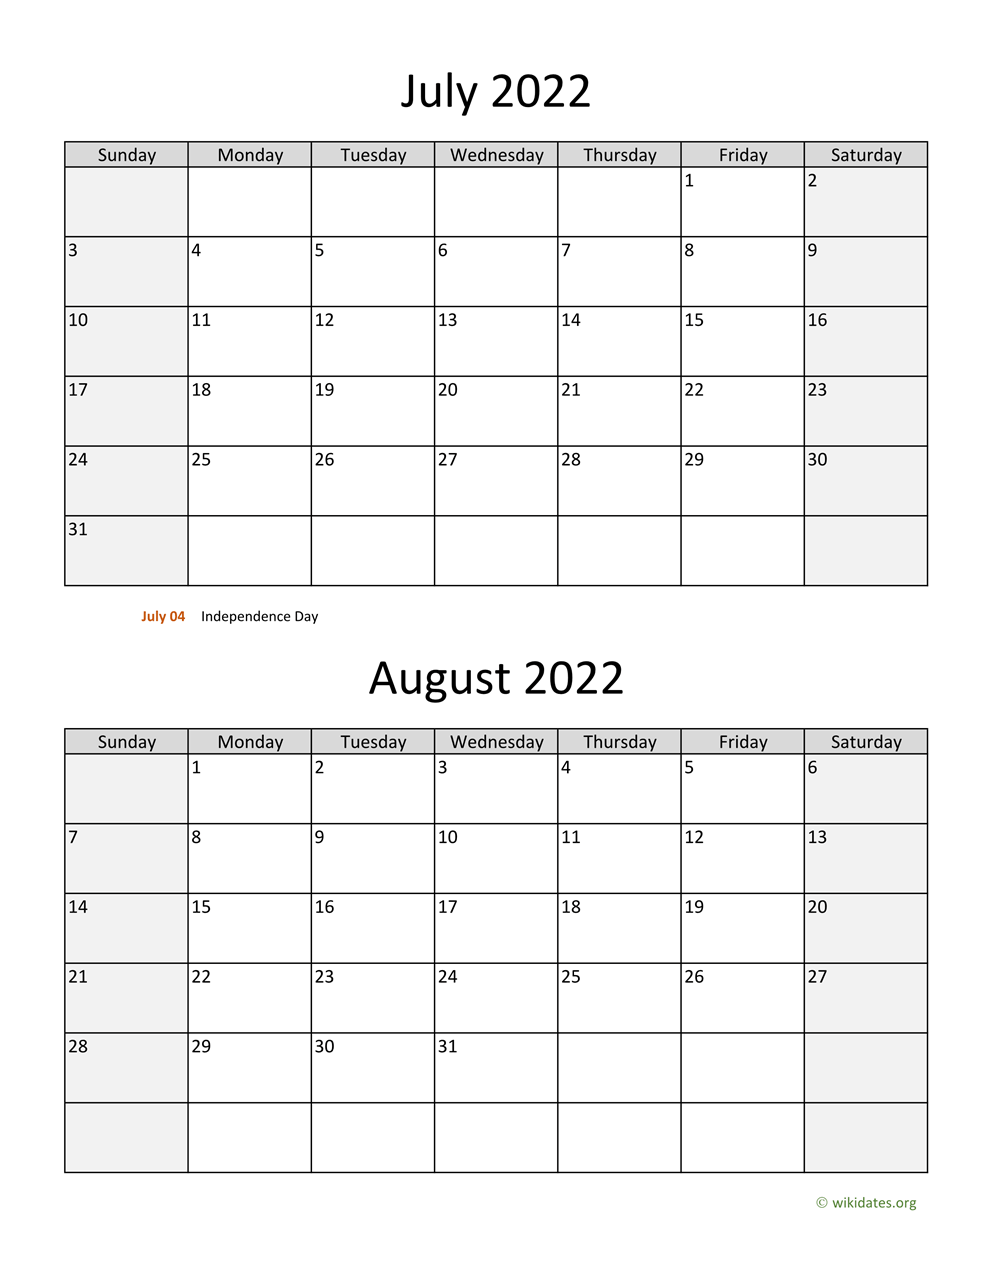 June And July Calendar 2022 July And August 2022 Calendar | Wikidates.org